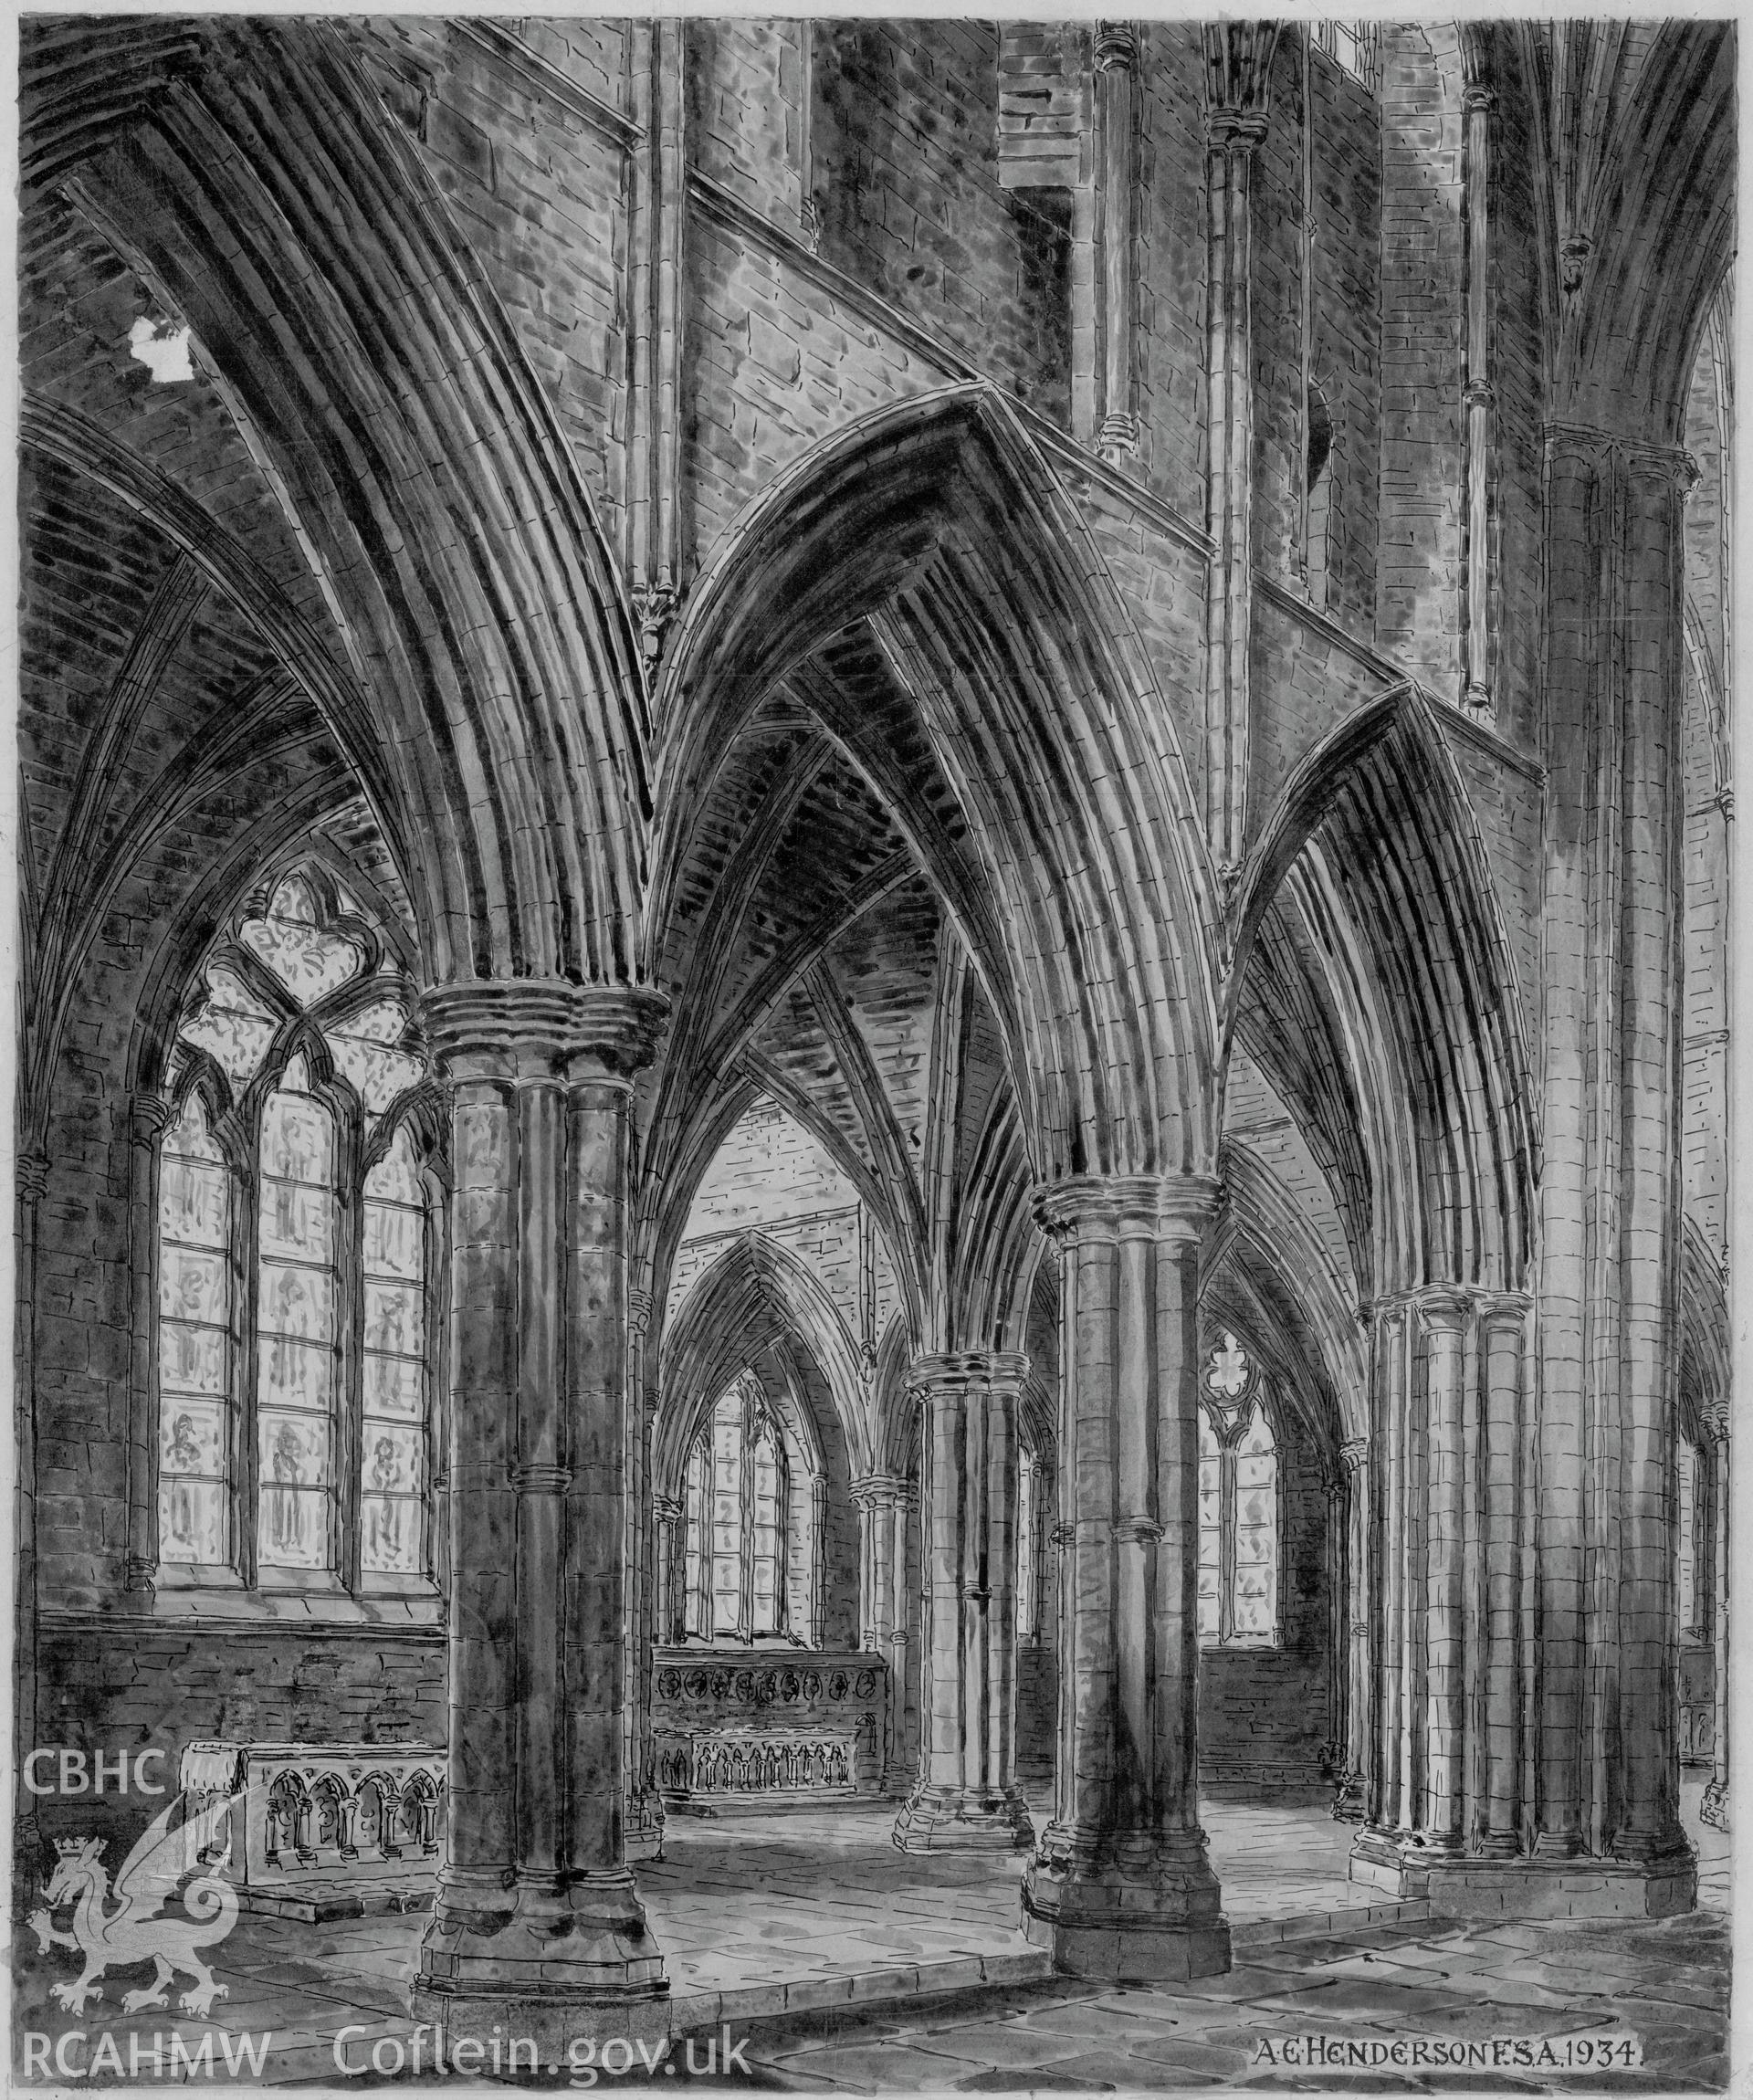 Digital copy of a conjectural reconstruction drawing of 'Tintern Abbey as Erected: North Transept, East Side, Looking Towards Sanctuary' produced by Arthur E. Henderson, 1934.